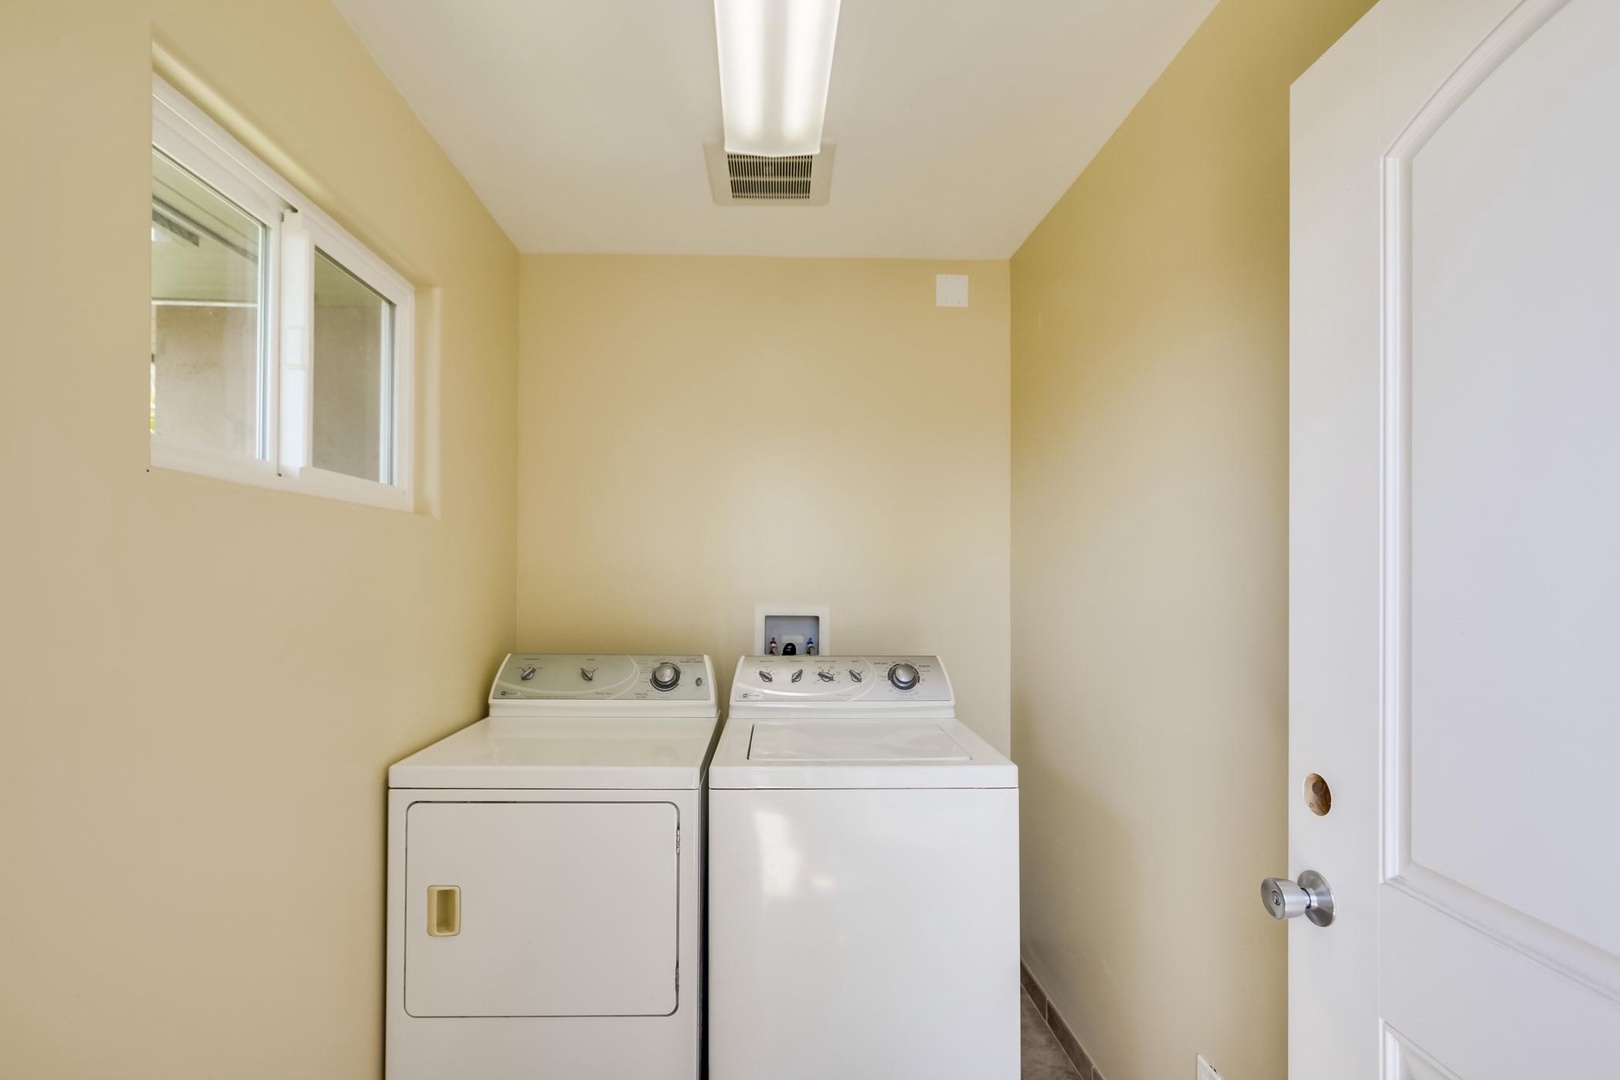 Laundry room with full washer/dryer